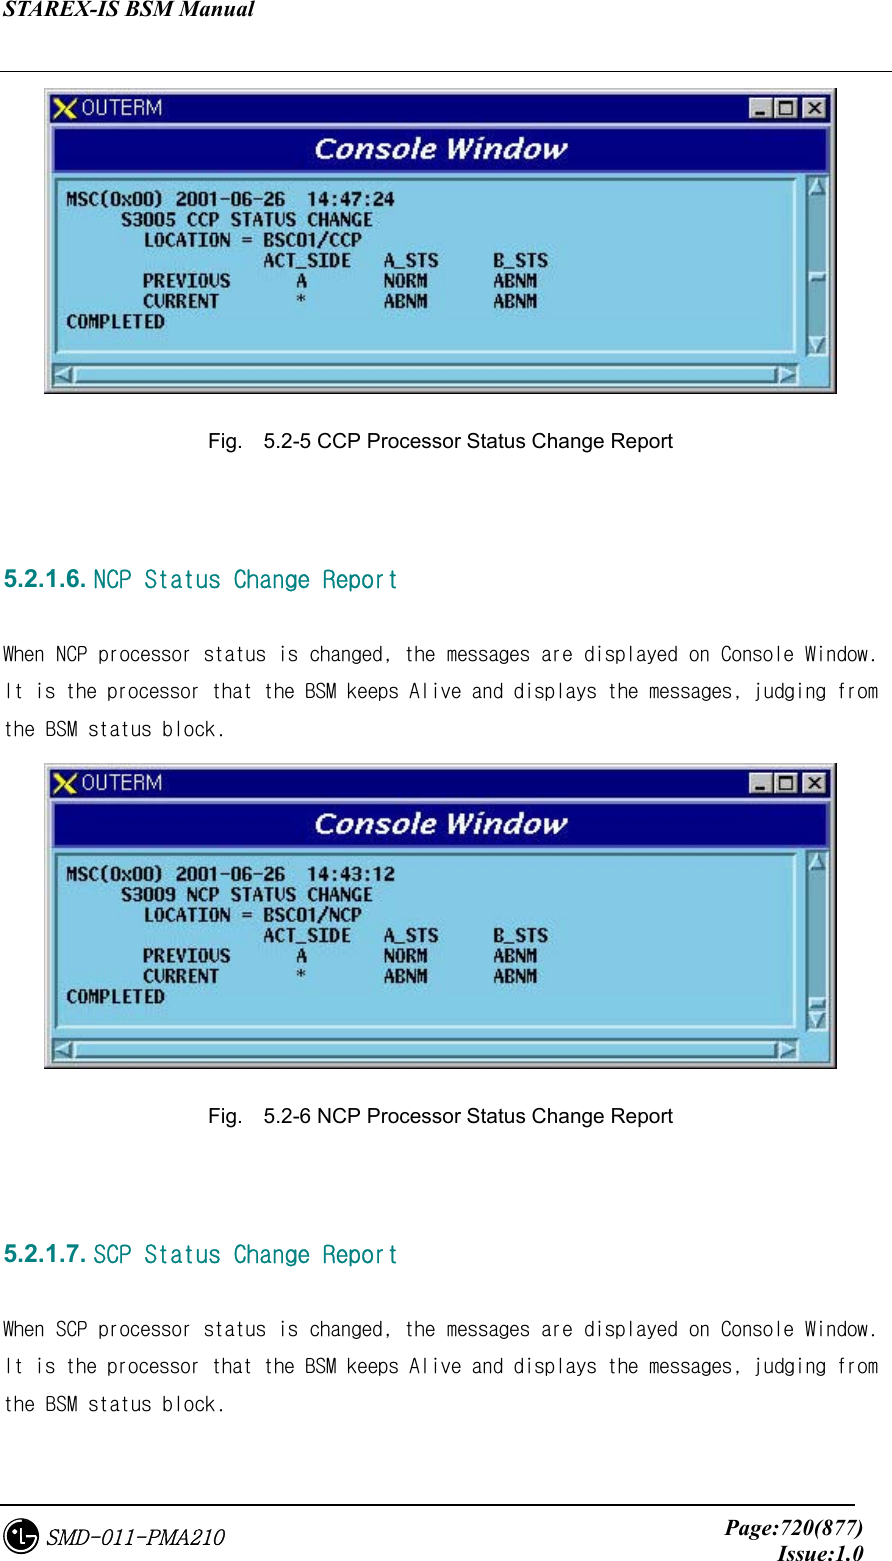 STAREX-IS BSM Manual     Page:720(877)Issue:1.0SMD-011-PMA210  Fig.    5.2-5 CCP Processor Status Change Report   5.2.1.6. NCP Status Change Report  When NCP processor status is changed, the messages are displayed on Console Window. It is the processor that the BSM keeps Alive and displays the messages, judging from the BSM status block.  Fig.    5.2-6 NCP Processor Status Change Report   5.2.1.7. SCP Status Change Report  When SCP processor status is changed, the messages are displayed on Console Window. It is the processor that the BSM keeps Alive and displays the messages, judging from the BSM status block. 